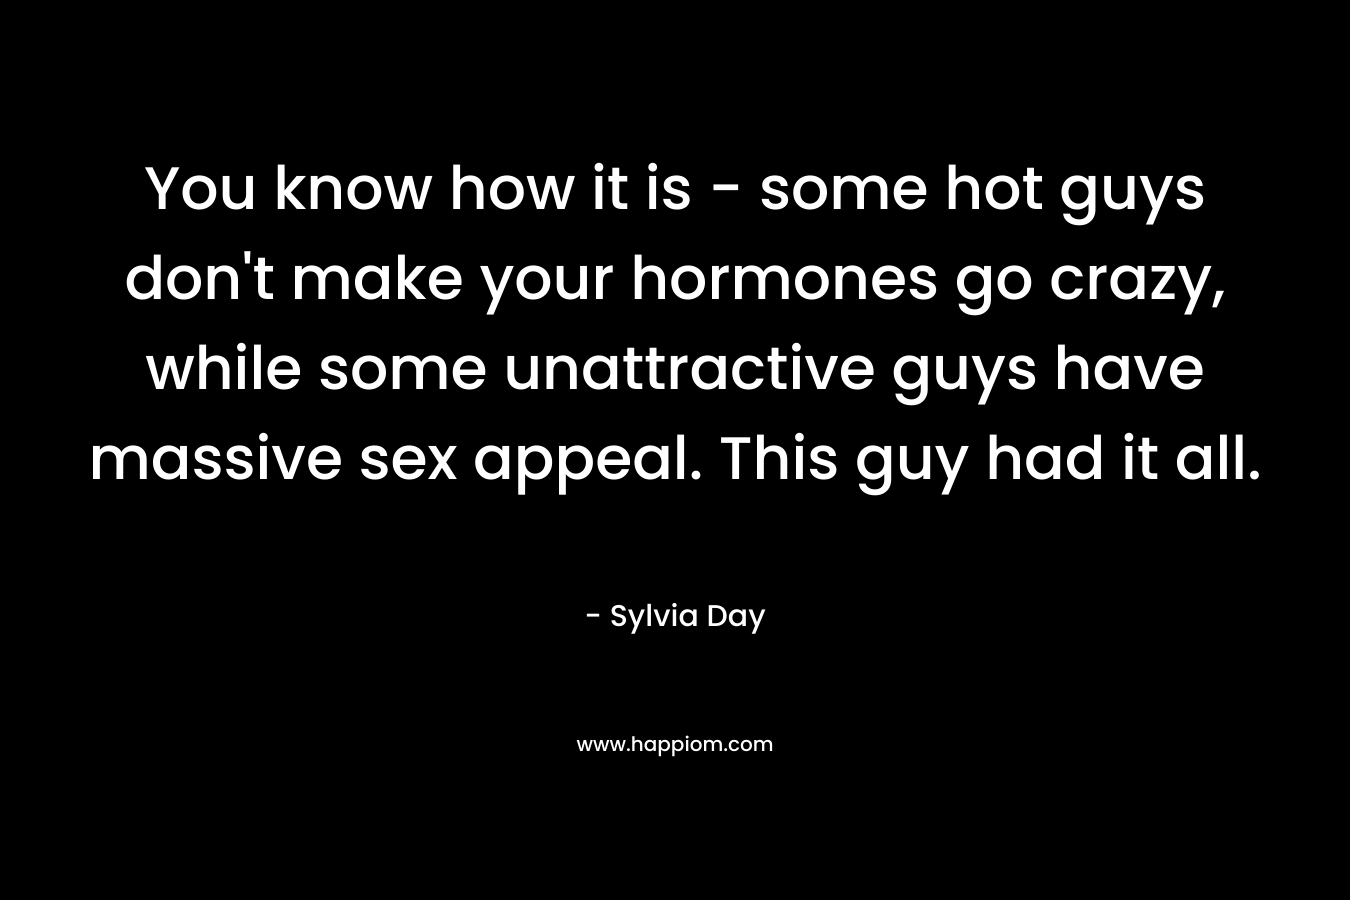 You know how it is – some hot guys don’t make your hormones go crazy, while some unattractive guys have massive sex appeal. This guy had it all. – Sylvia Day